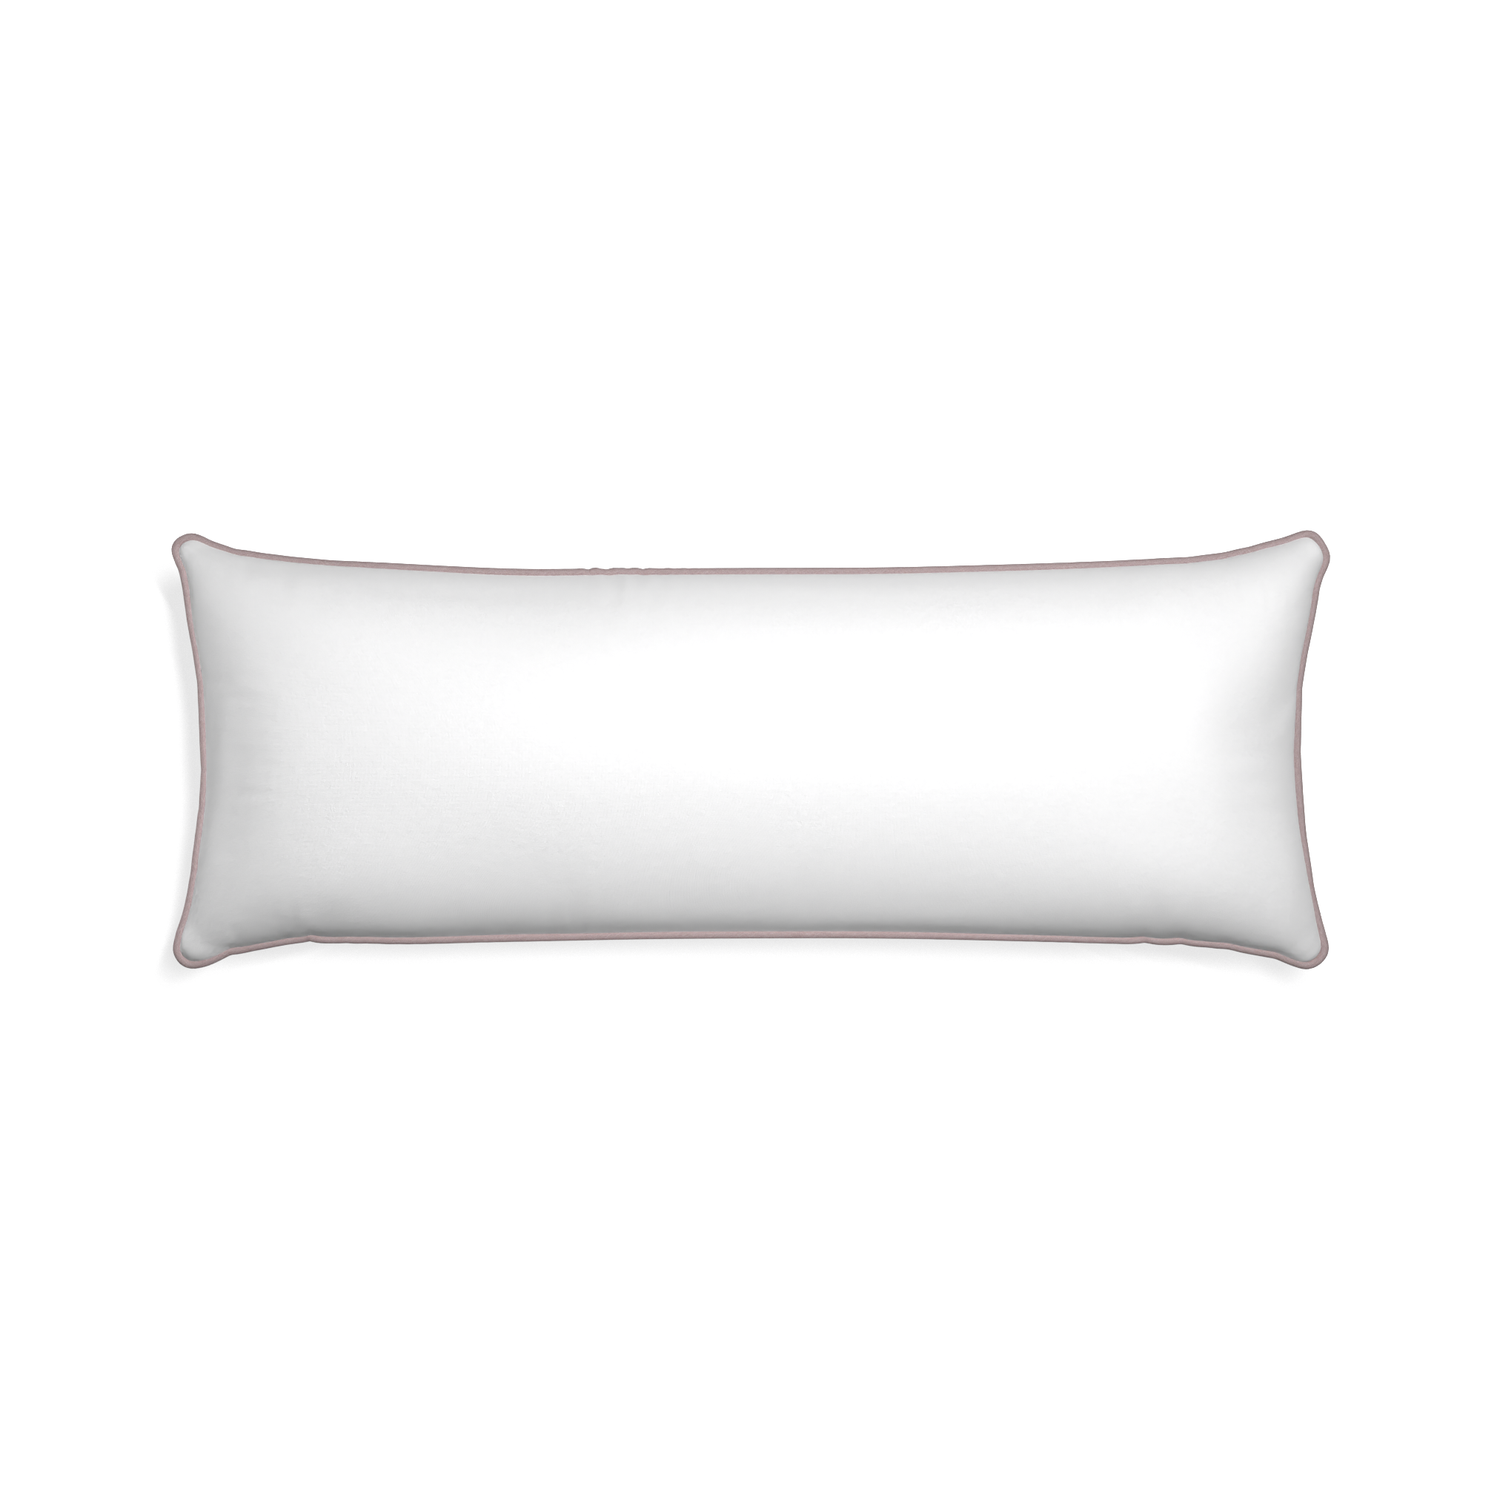 Xl-lumbar snow custom white cottonpillow with orchid piping on white background